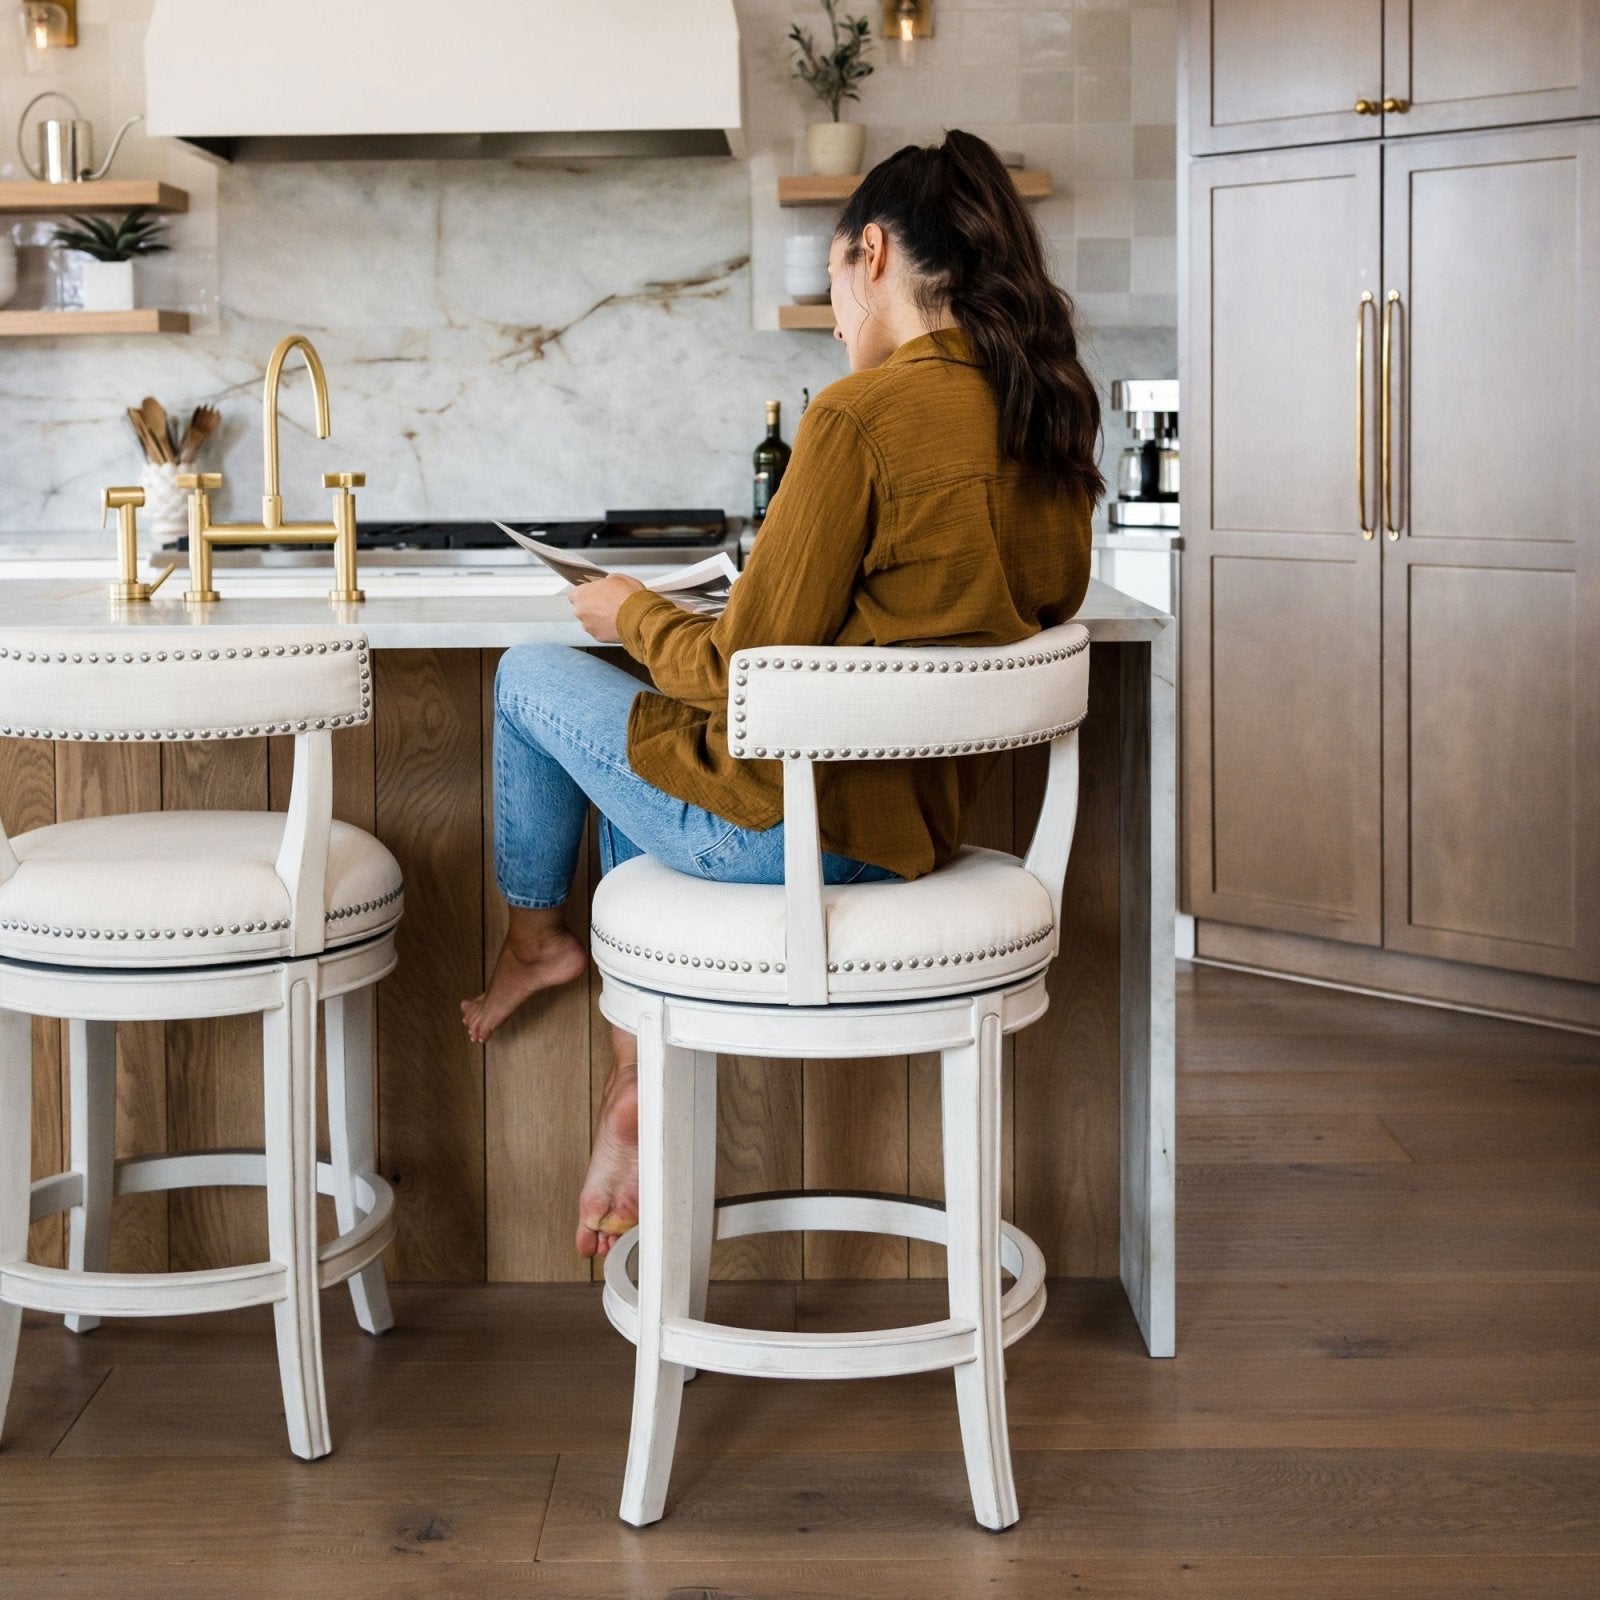 Alexander Counter Stool in White Oak Finish with Natural Color Fabric Upholstery in Stools by Maven Lane